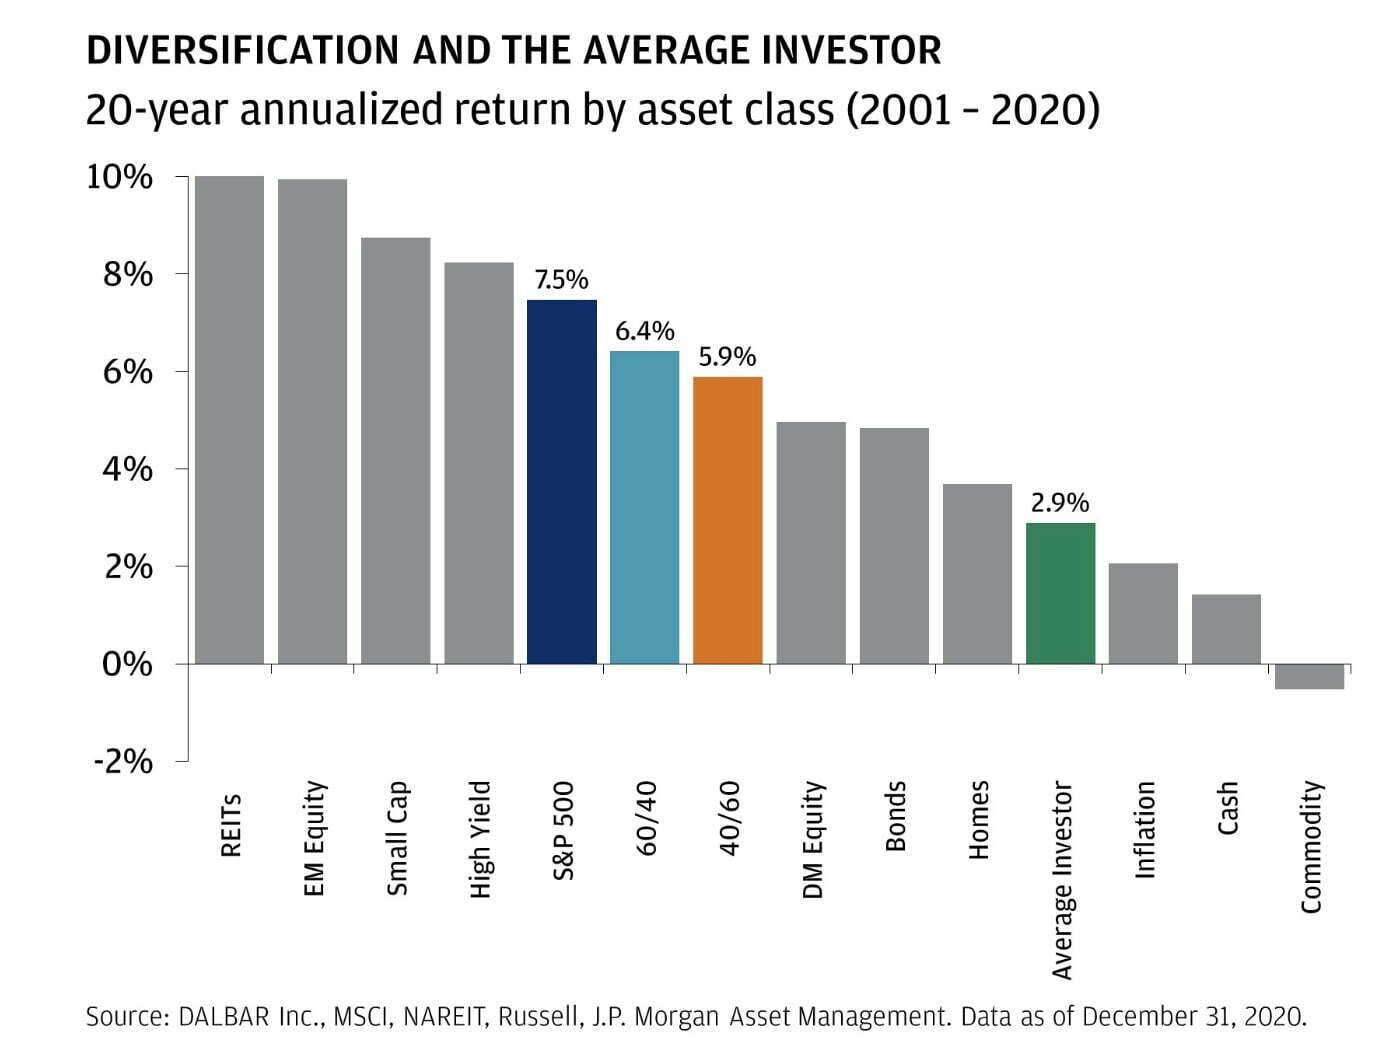 Diversification and Returns and Performance Of the Average Investor compared to other asset classes from 2001 until 2020 by JP Morgan